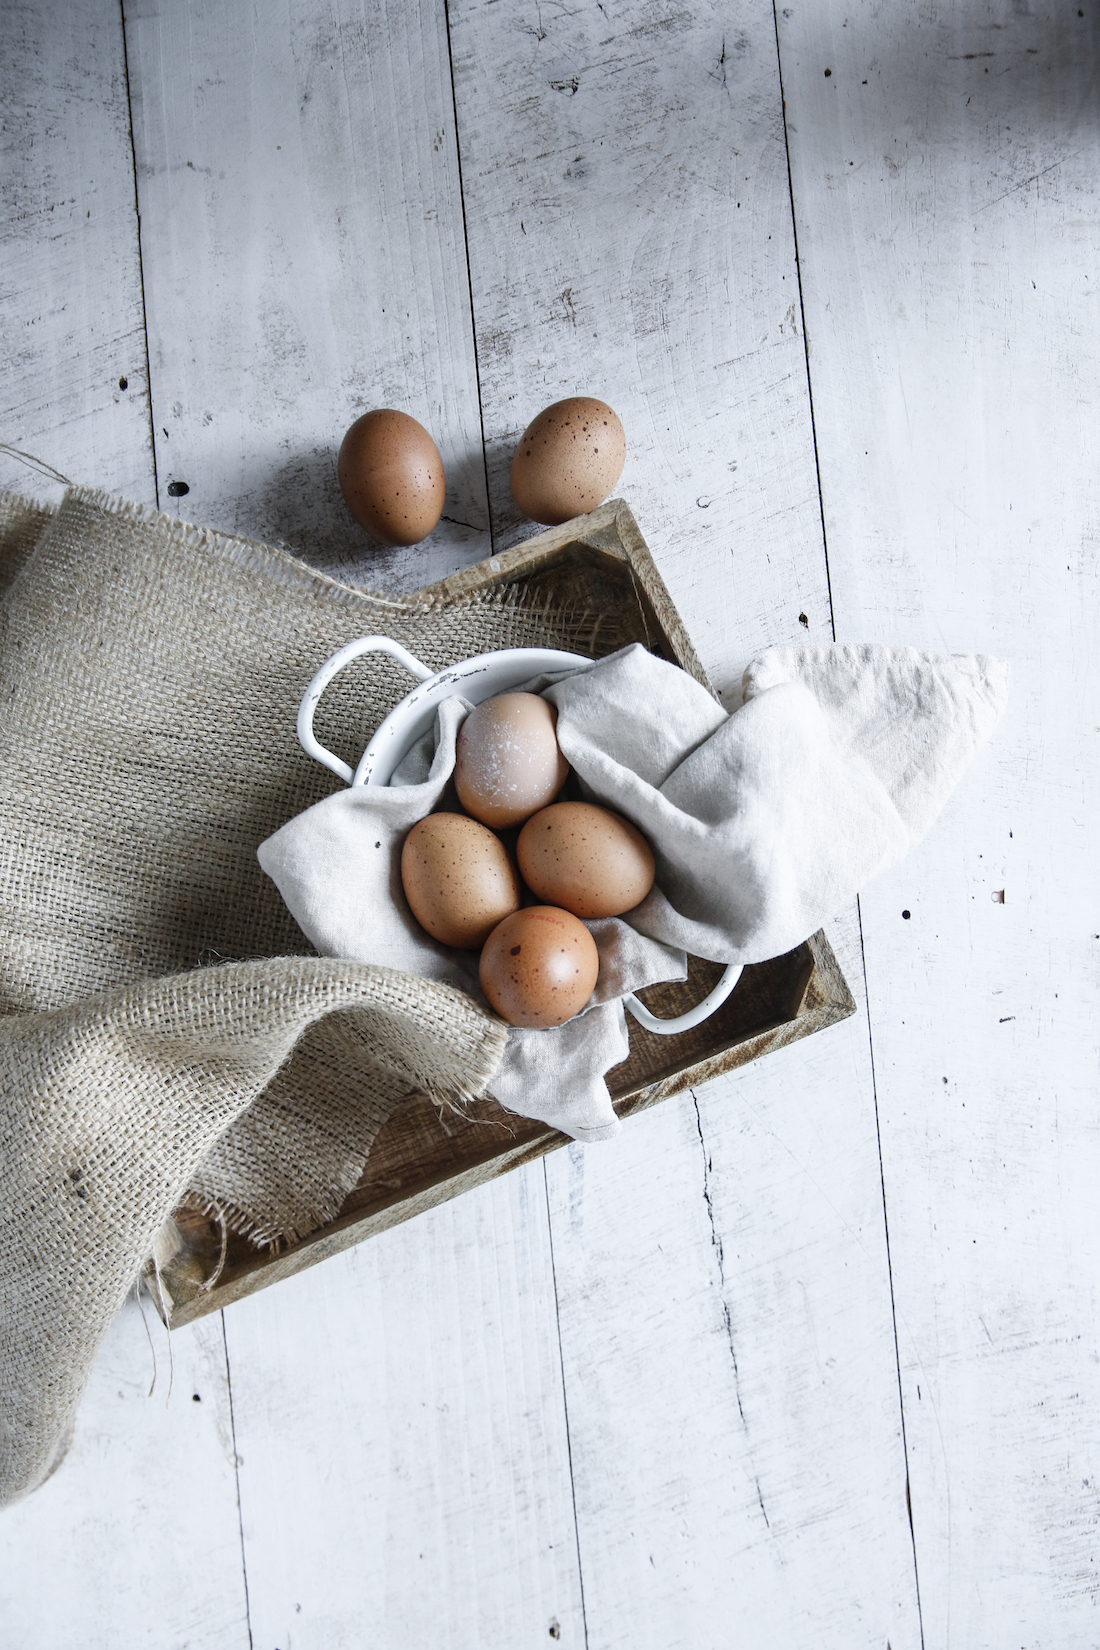 Eggs! FULL of protein! Boiled eggs are an incredible snack. Yummy, filling &amp; super healthy! 